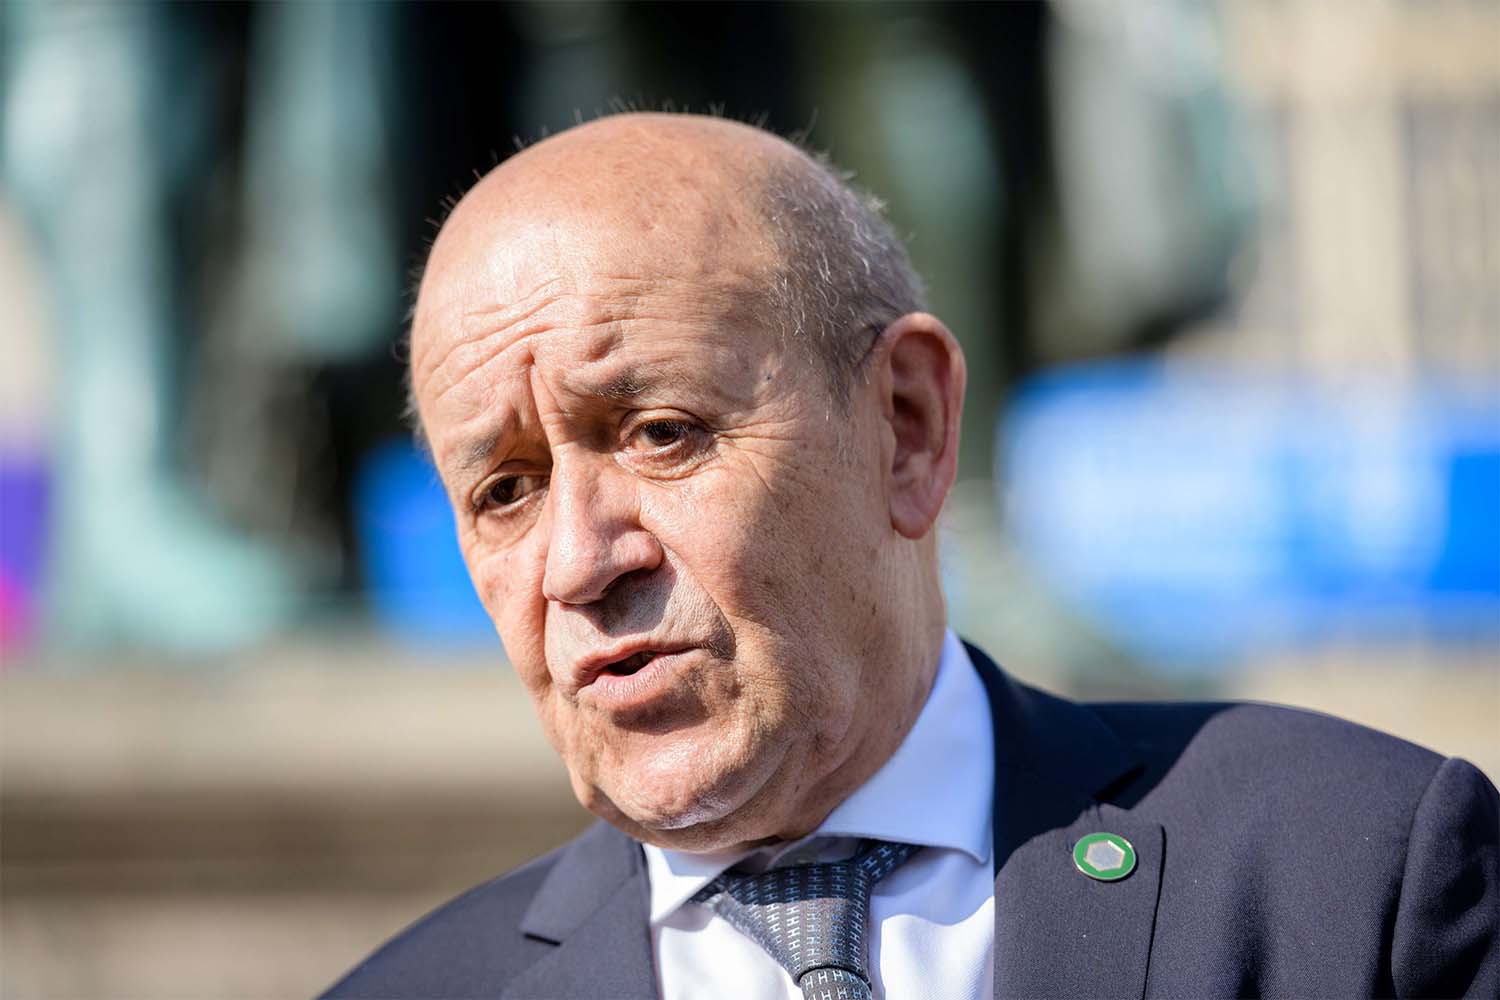 Le Drian is asking for the departure of foreign forces and mercenaries